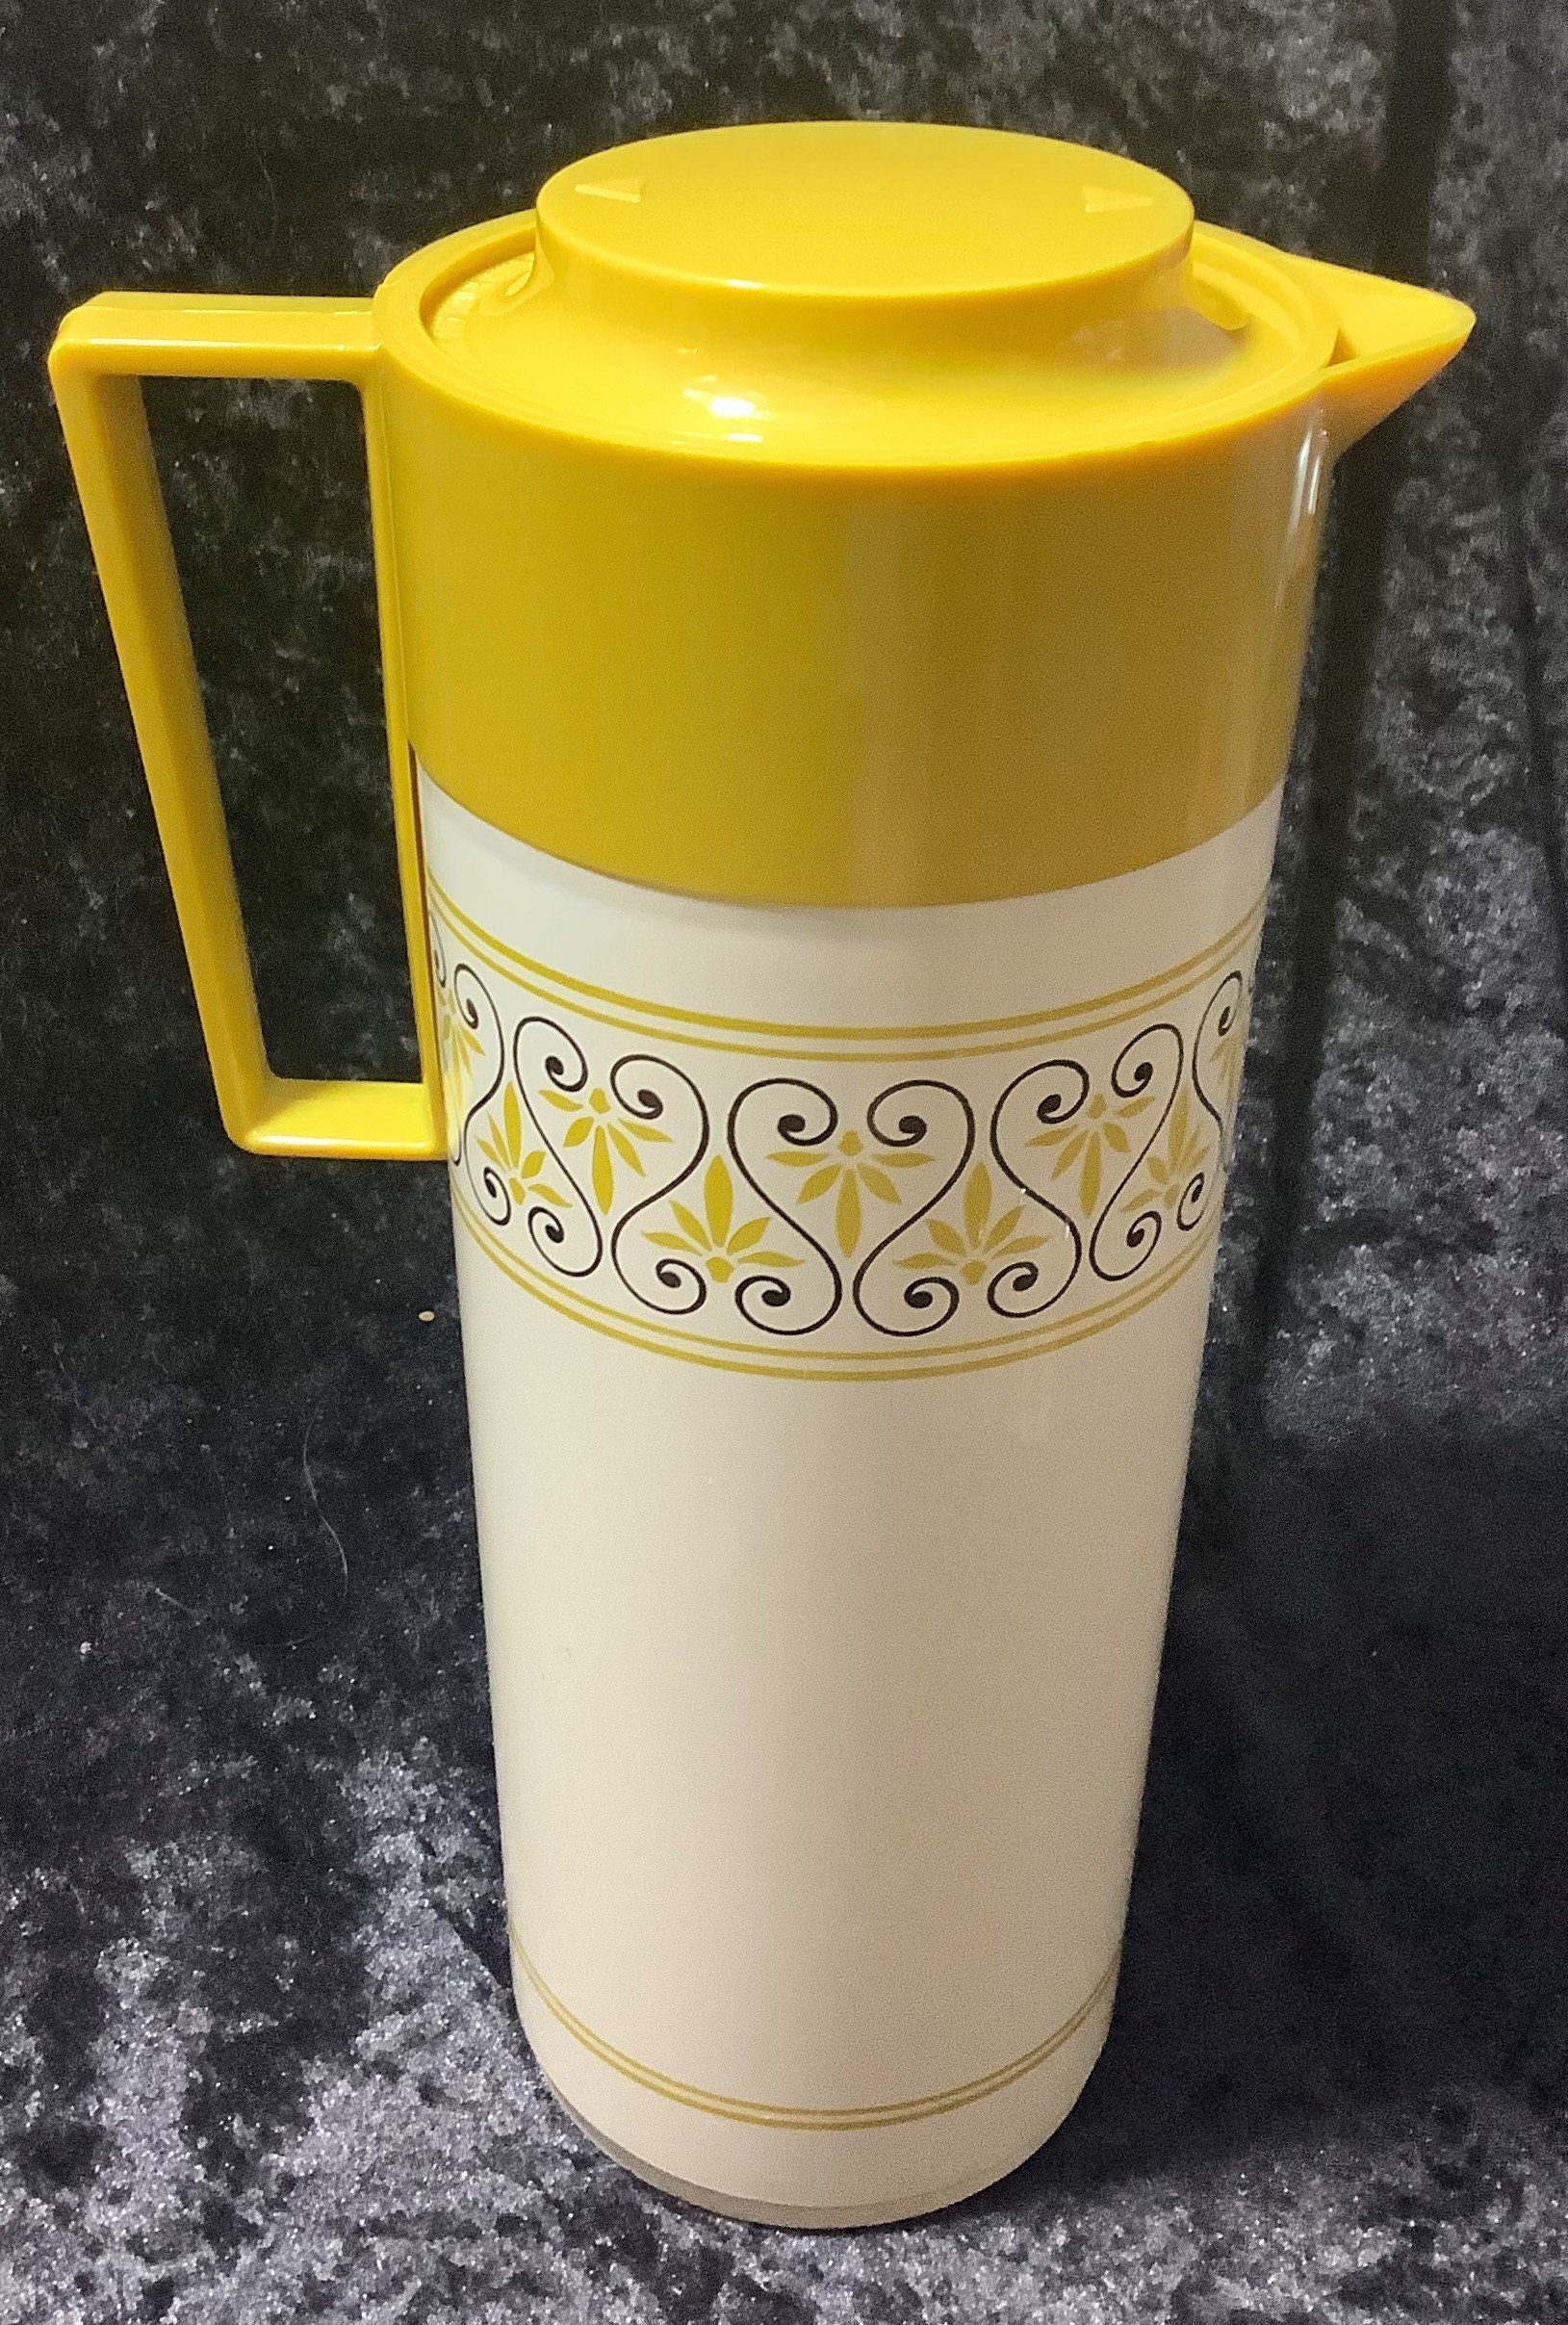 Vintage Stanley Insulated Pitcher 7.75 Tall. Solid, Very Good Condition.